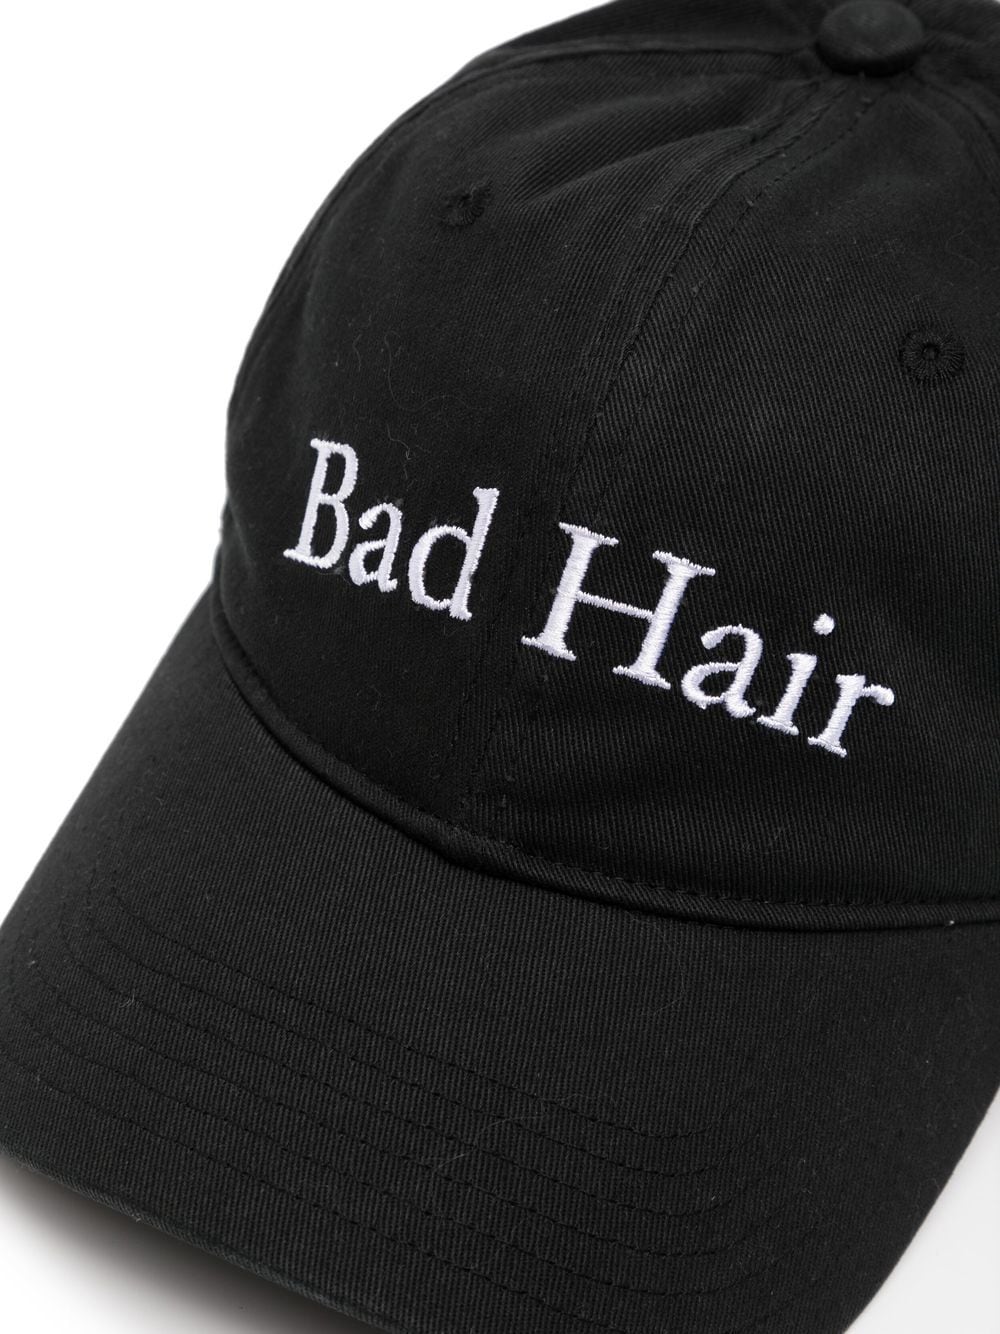 Bad Hair Embroidery Washed Cap